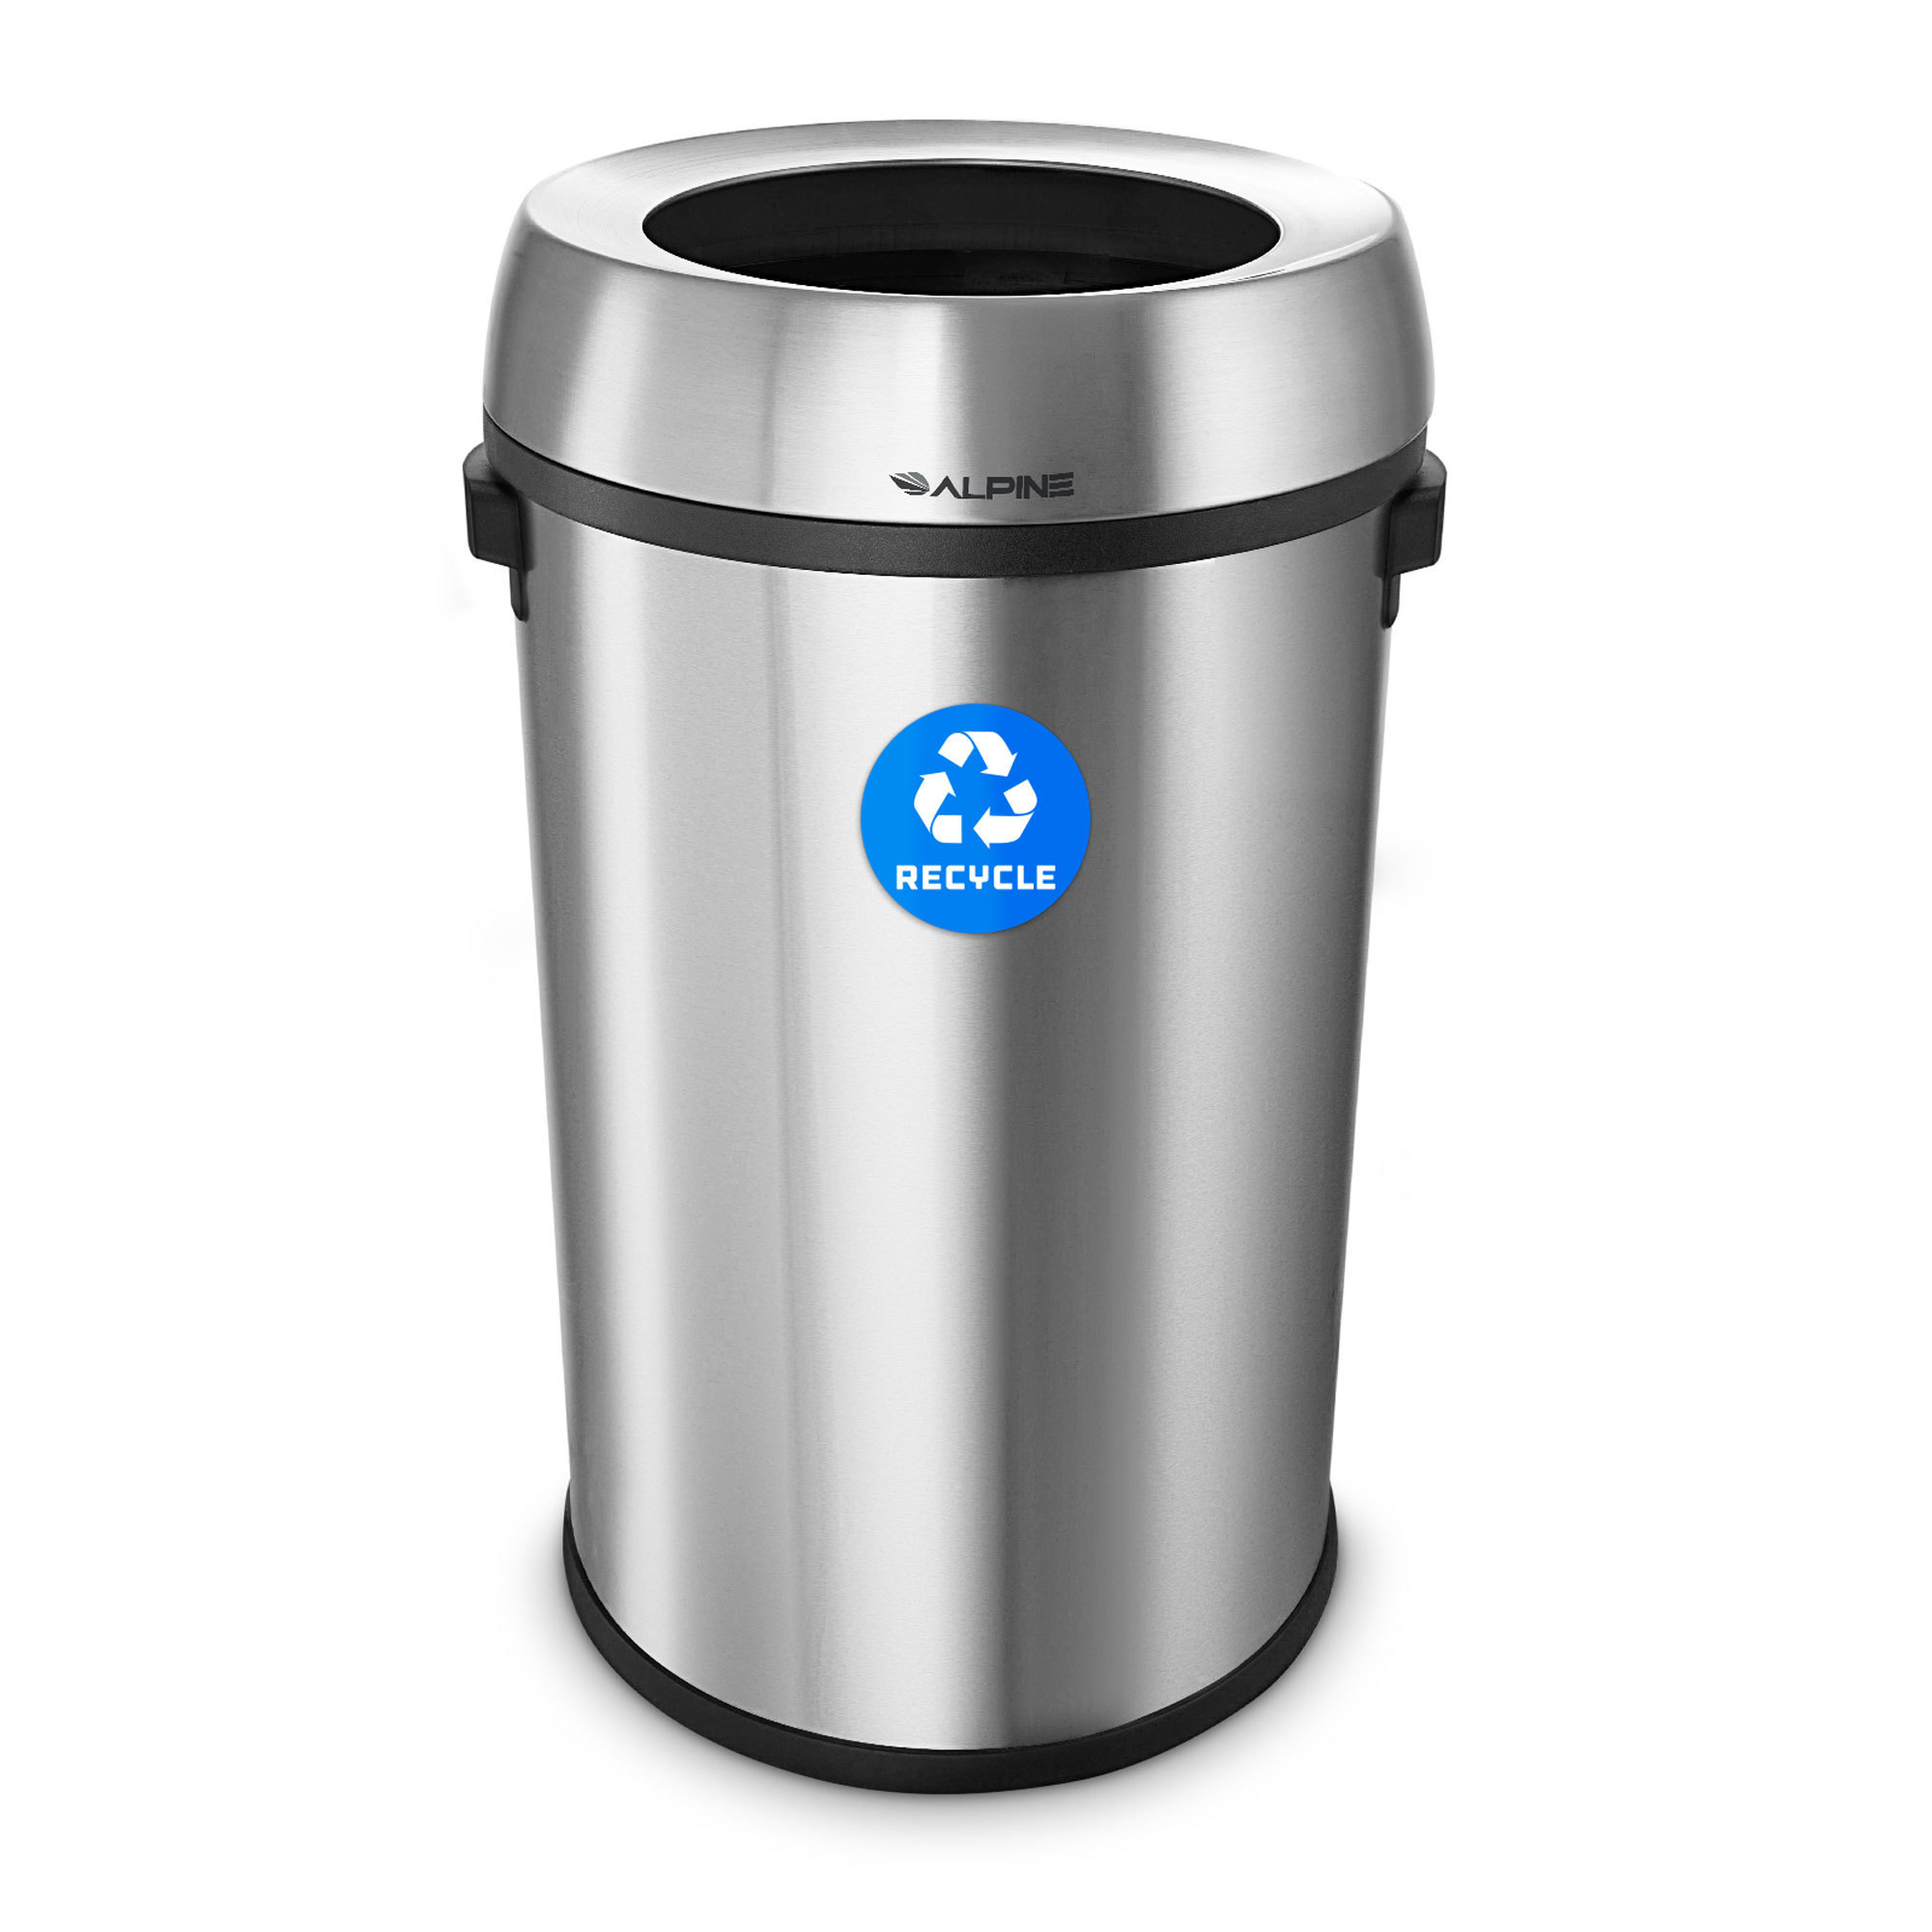 Alpine, 17-Gallon Stainless Steel Recycling Trash Can, Capacity 17 Gal, Model ALP470-65L-R